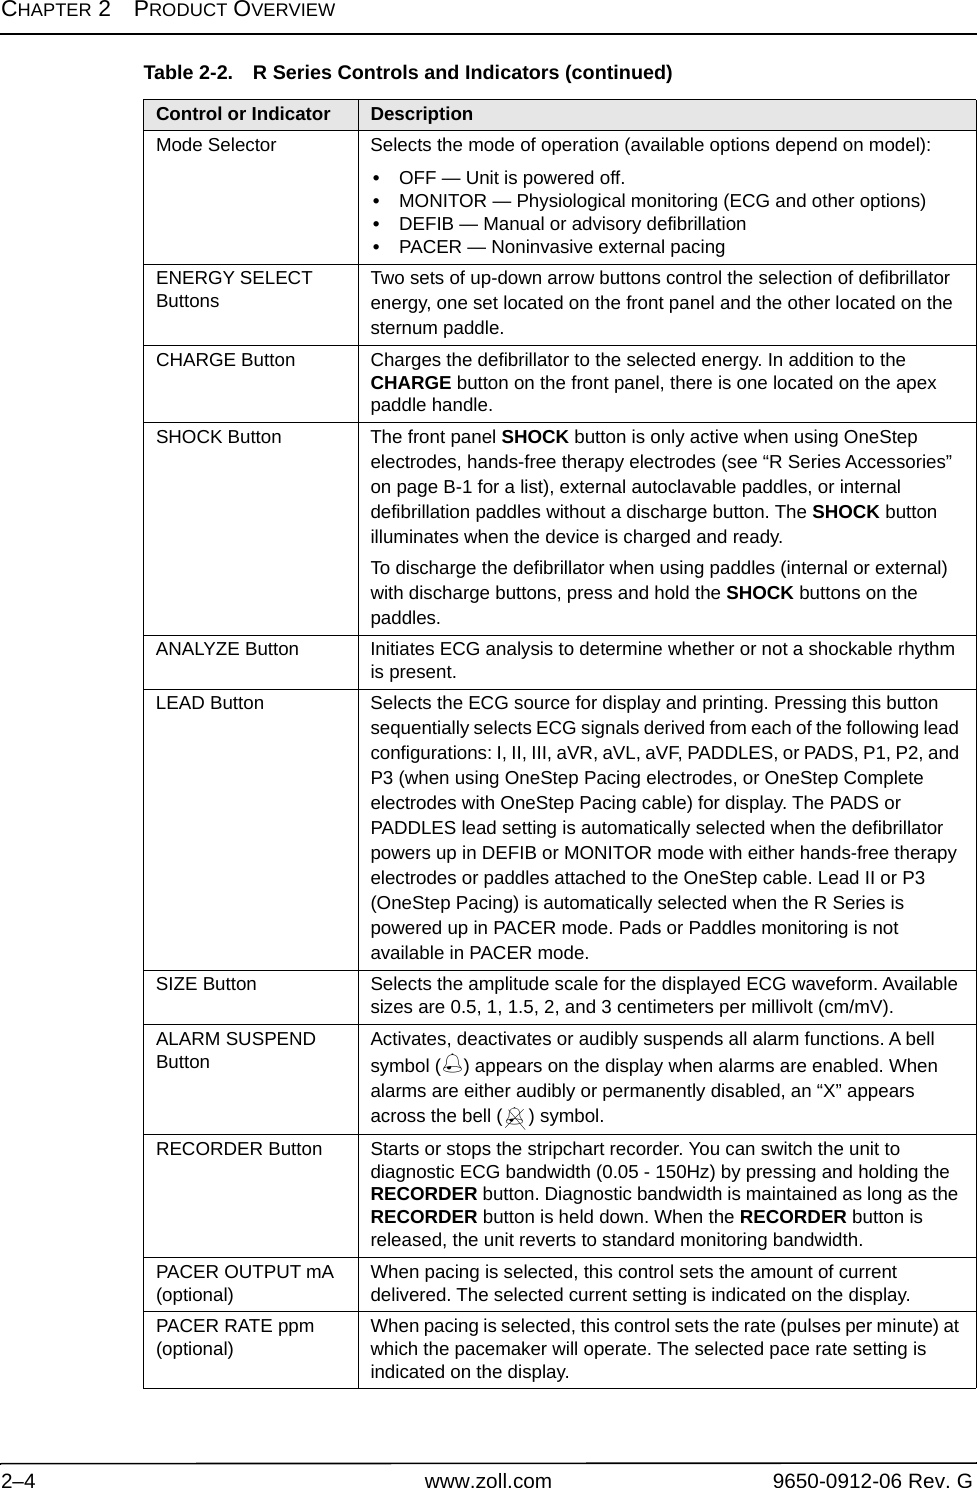 CHAPTER 2PRODUCT OVERVIEW2–4 www.zoll.com 9650-0912-06 Rev. GMode Selector Selects the mode of operation (available options depend on model):•OFF — Unit is powered off.•MONITOR — Physiological monitoring (ECG and other options)•DEFIB — Manual or advisory defibrillation•PACER — Noninvasive external pacingENERGY SELECT Buttons Two sets of up-down arrow buttons control the selection of defibrillator energy, one set located on the front panel and the other located on the sternum paddle.CHARGE Button Charges the defibrillator to the selected energy. In addition to the CHARGE button on the front panel, there is one located on the apex paddle handle.SHOCK Button  The front panel SHOCK button is only active when using OneStep electrodes, hands-free therapy electrodes (see “R Series Accessories” on page B-1 for a list), external autoclavable paddles, or internal defibrillation paddles without a discharge button. The SHOCK button illuminates when the device is charged and ready.To discharge the defibrillator when using paddles (internal or external) with discharge buttons, press and hold the SHOCK buttons on the paddles.ANALYZE Button Initiates ECG analysis to determine whether or not a shockable rhythm is present. LEAD Button Selects the ECG source for display and printing. Pressing this button sequentially selects ECG signals derived from each of the following lead configurations: I, II, III, aVR, aVL, aVF, PADDLES, or PADS, P1, P2, and P3 (when using OneStep Pacing electrodes, or OneStep Complete electrodes with OneStep Pacing cable) for display. The PADS or PADDLES lead setting is automatically selected when the defibrillator powers up in DEFIB or MONITOR mode with either hands-free therapy electrodes or paddles attached to the OneStep cable. Lead II or P3 (OneStep Pacing) is automatically selected when the R Series is powered up in PACER mode. Pads or Paddles monitoring is not available in PACER mode.SIZE Button Selects the amplitude scale for the displayed ECG waveform. Available sizes are 0.5, 1, 1.5, 2, and 3 centimeters per millivolt (cm/mV).ALARM SUSPEND Button  Activates, deactivates or audibly suspends all alarm functions. A bell symbol () appears on the display when alarms are enabled. When alarms are either audibly or permanently disabled, an “X” appears across the bell ( ) symbol.RECORDER Button Starts or stops the stripchart recorder. You can switch the unit to diagnostic ECG bandwidth (0.05 - 150Hz) by pressing and holding the RECORDER button. Diagnostic bandwidth is maintained as long as the RECORDER button is held down. When the RECORDER button is released, the unit reverts to standard monitoring bandwidth.PACER OUTPUT mA(optional) When pacing is selected, this control sets the amount of current   delivered. The selected current setting is indicated on the display.PACER RATE ppm(optional) When pacing is selected, this control sets the rate (pulses per minute) at which the pacemaker will operate. The selected pace rate setting is indicated on the display.Table 2-2. R Series Controls and Indicators (continued)Control or Indicator Description